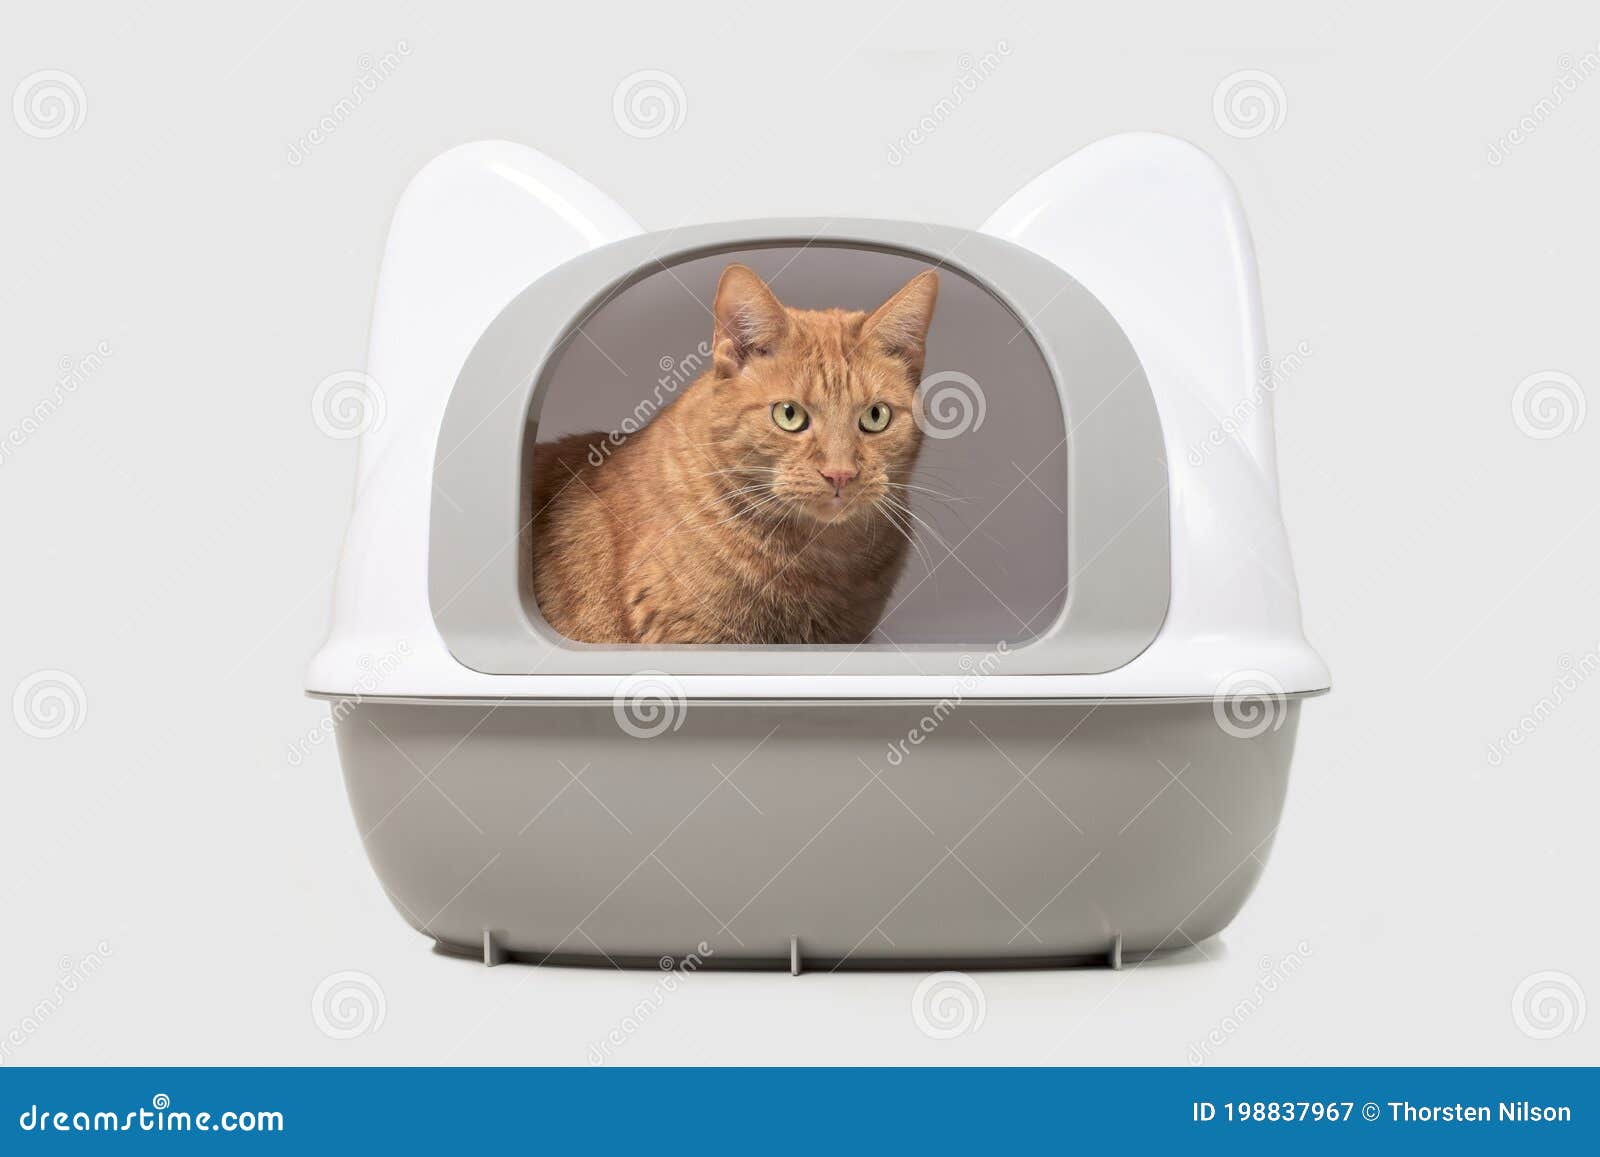 Cute Red Cat Sitting In A Closed Litter Box And Looking Away. Stock